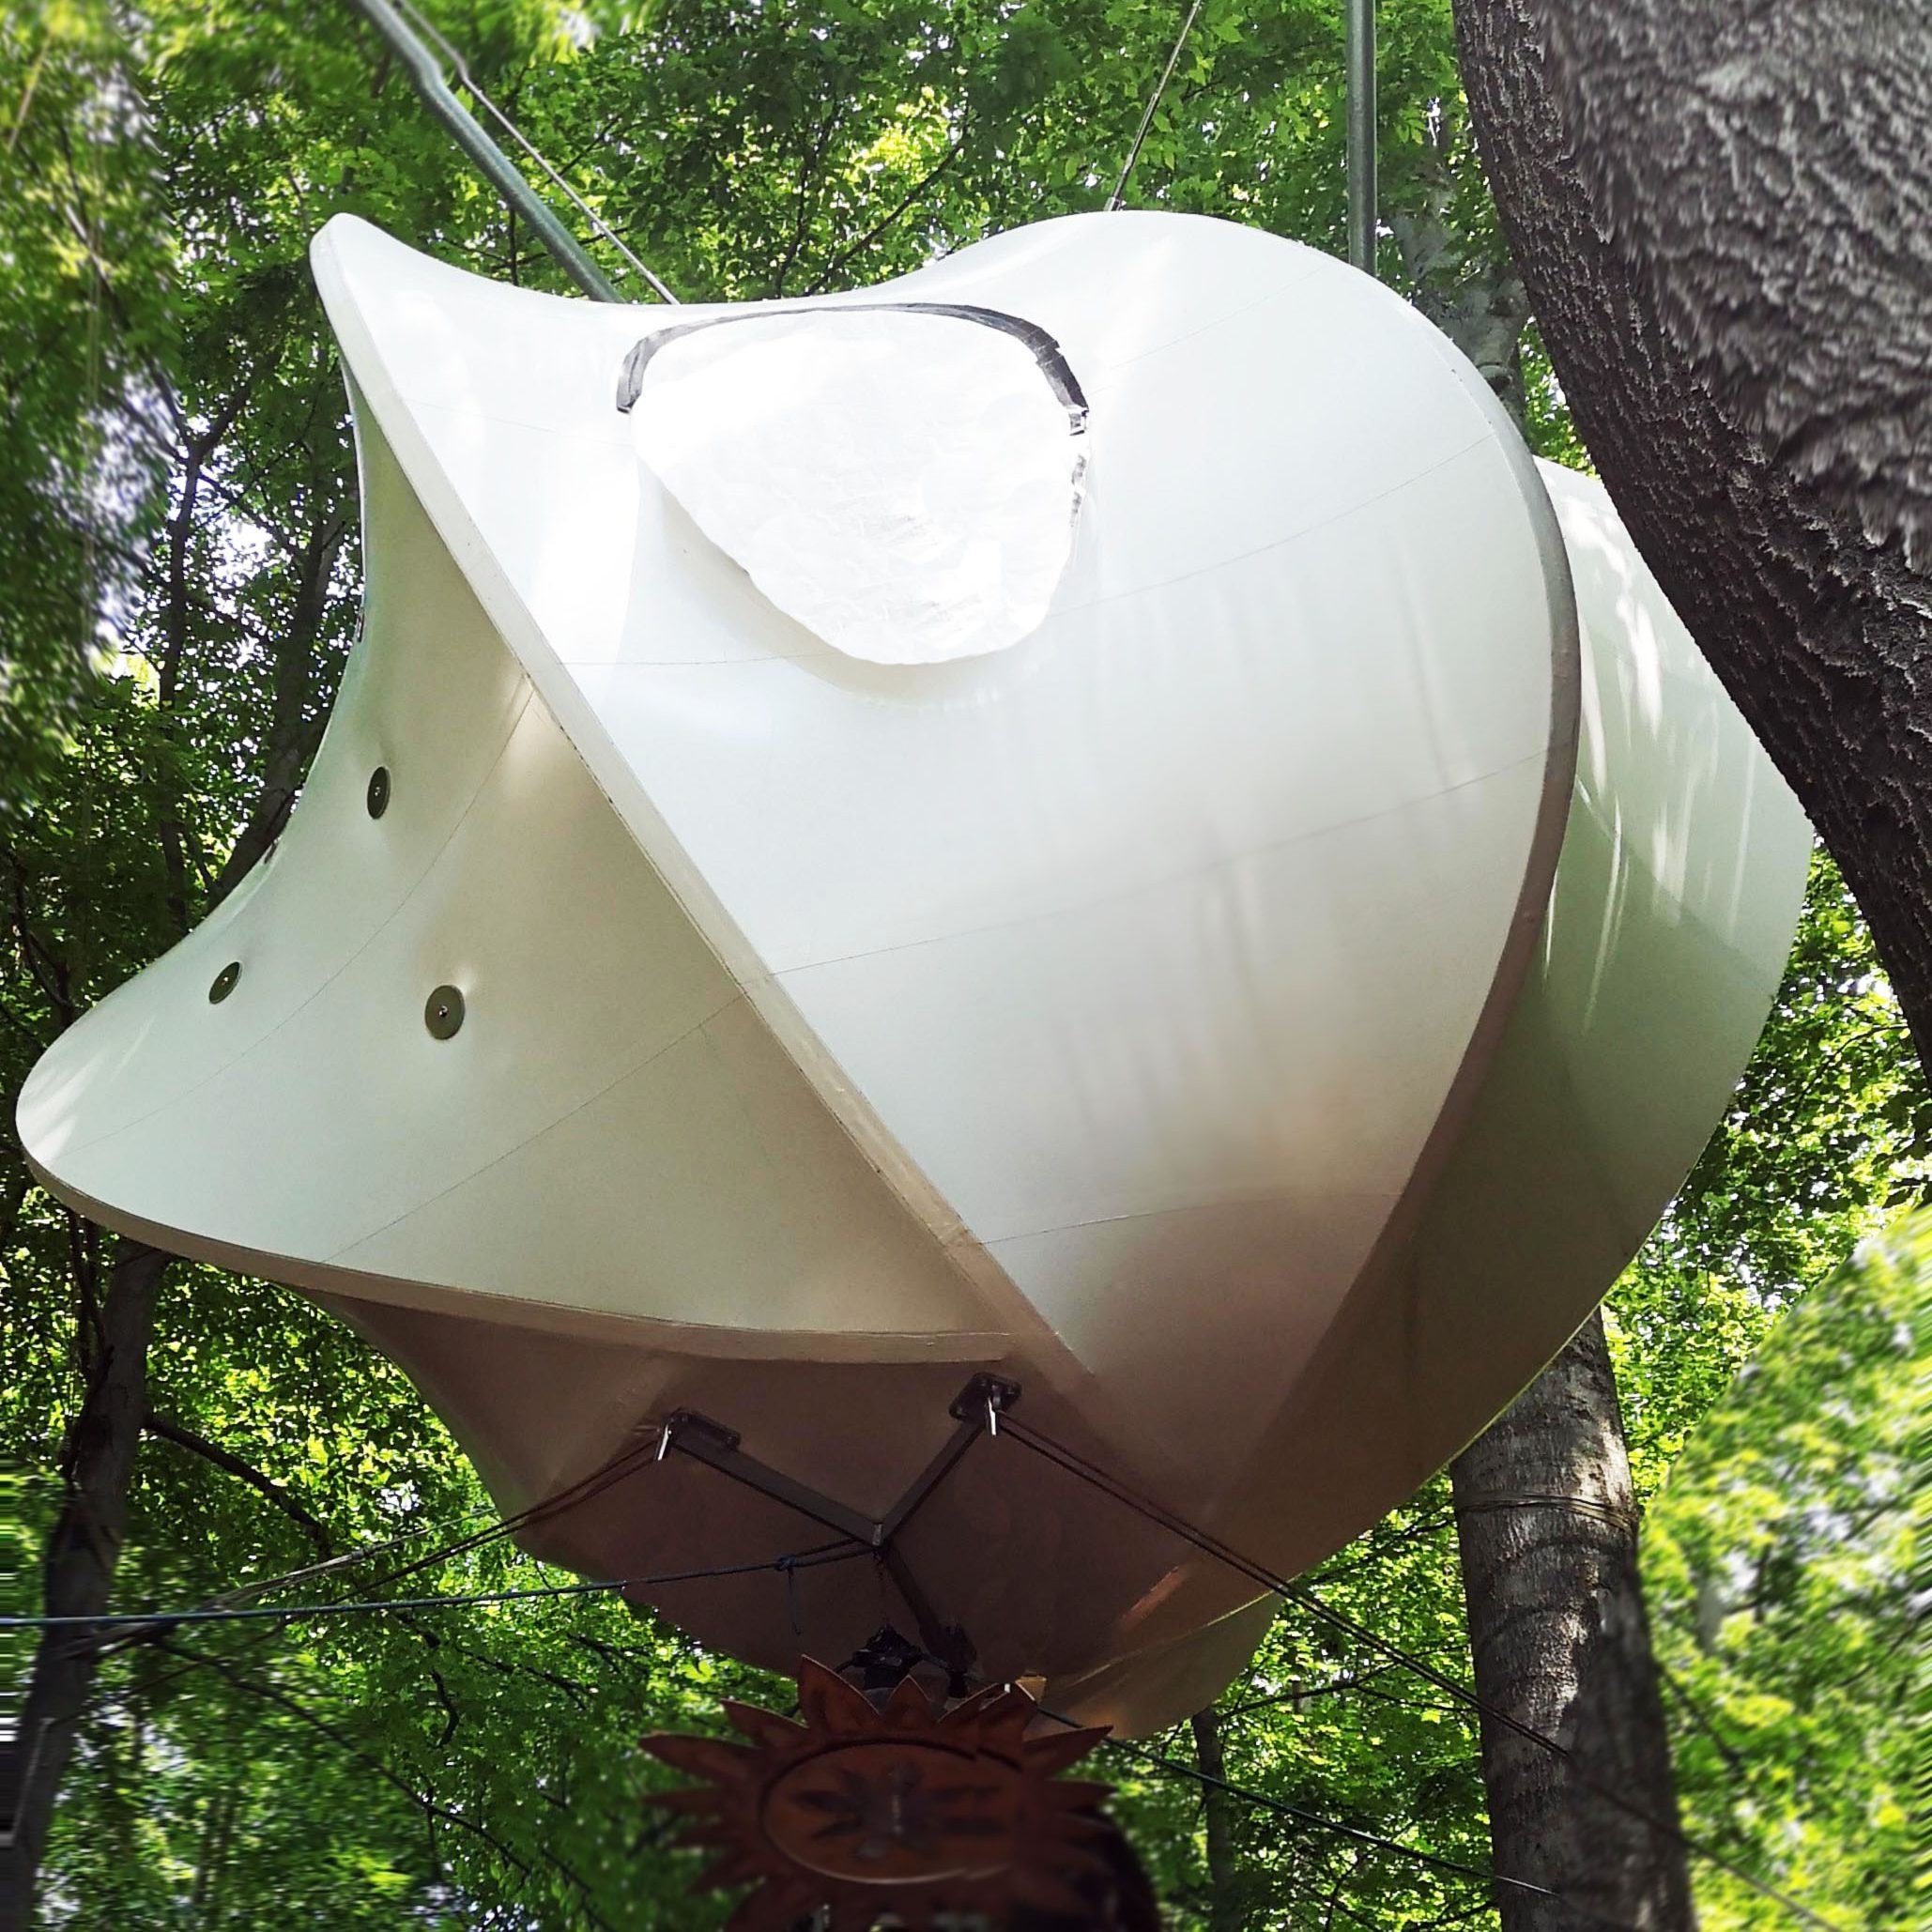 Photo of the prototype tree house hotel "Wolke7" with thermally insulated membrane from below